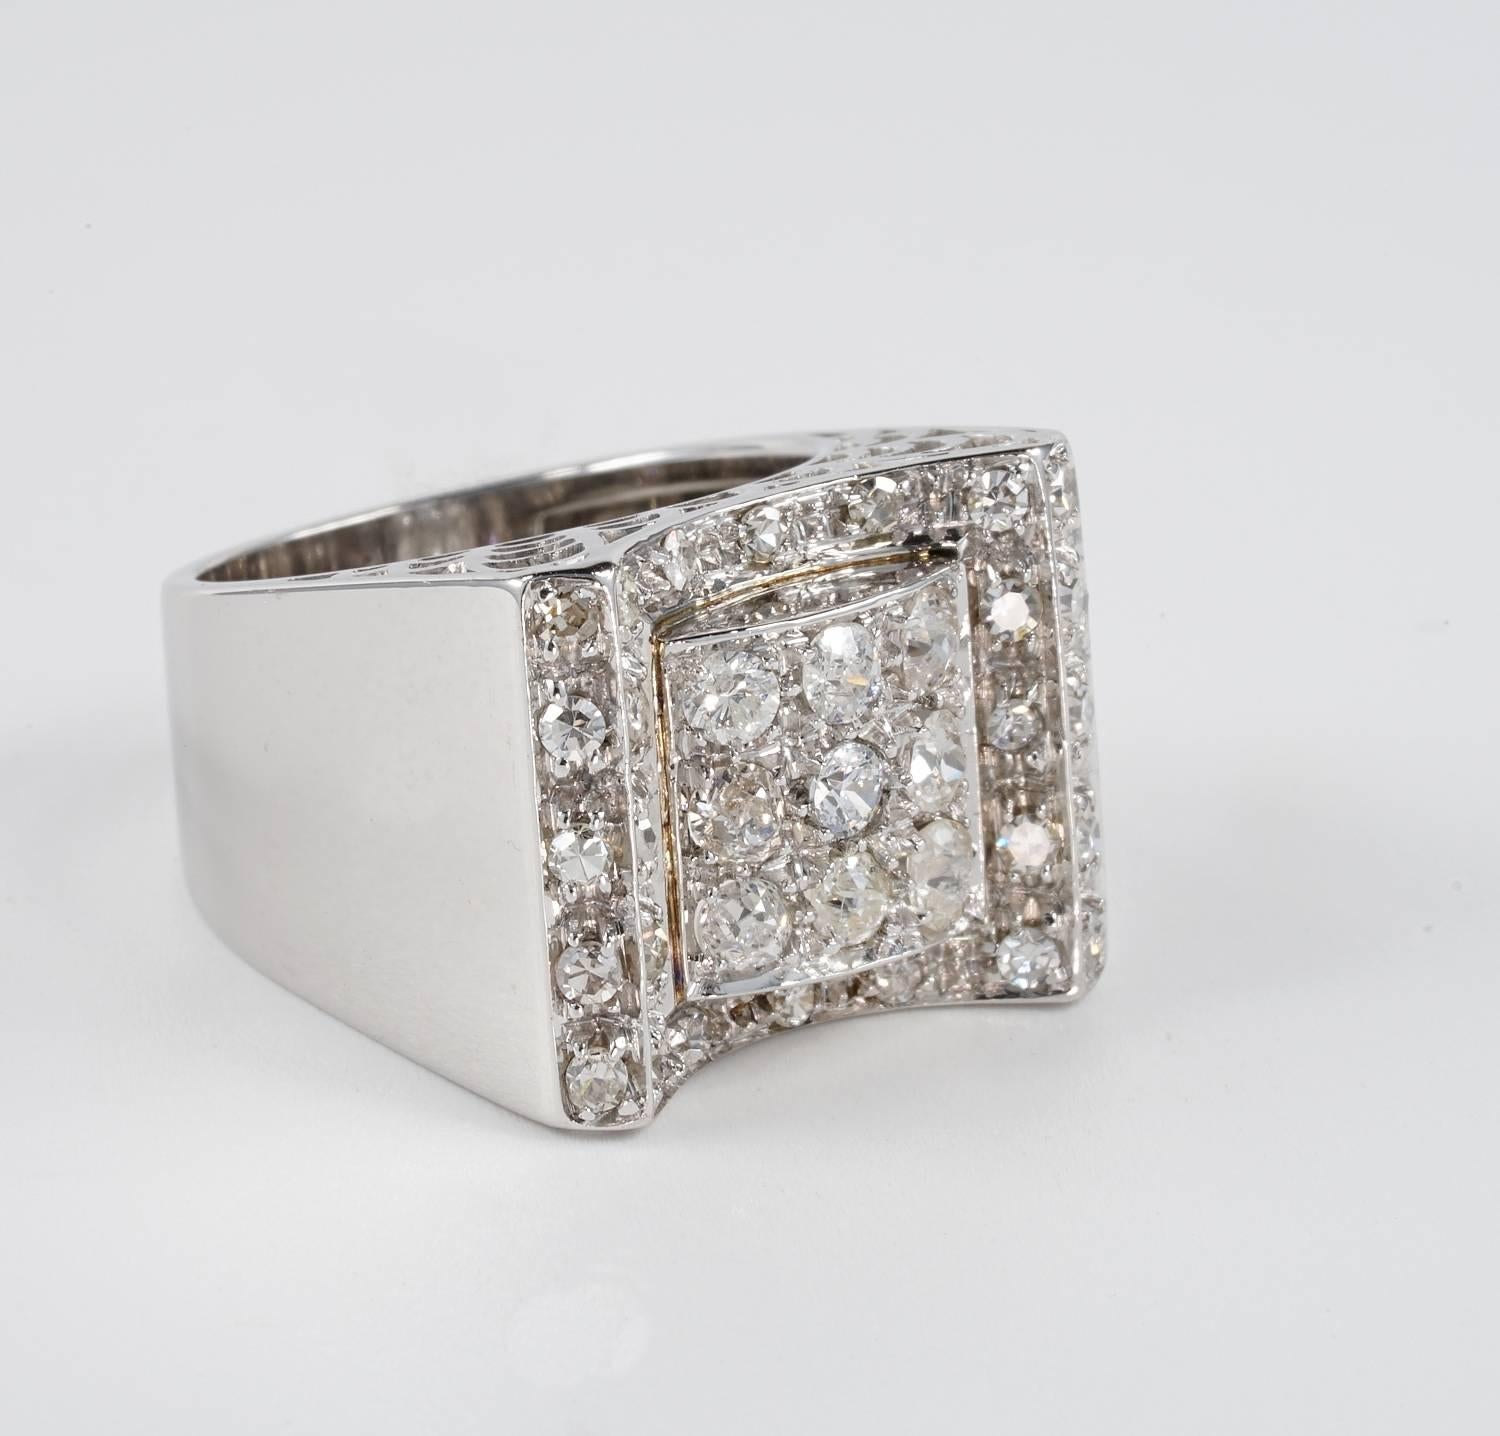 Genuine Art Deco, stunning buckle design overwhelmed by Diamonds
Approx 1.50 Ct of old min ecut and swiss cut Diamonds rated G VS/SI/I
Hand crafted of solid 18 KT white gold, marked
Impressive ring 1930 ca!

Metal: 18 Kt white gold
Hallmarks: